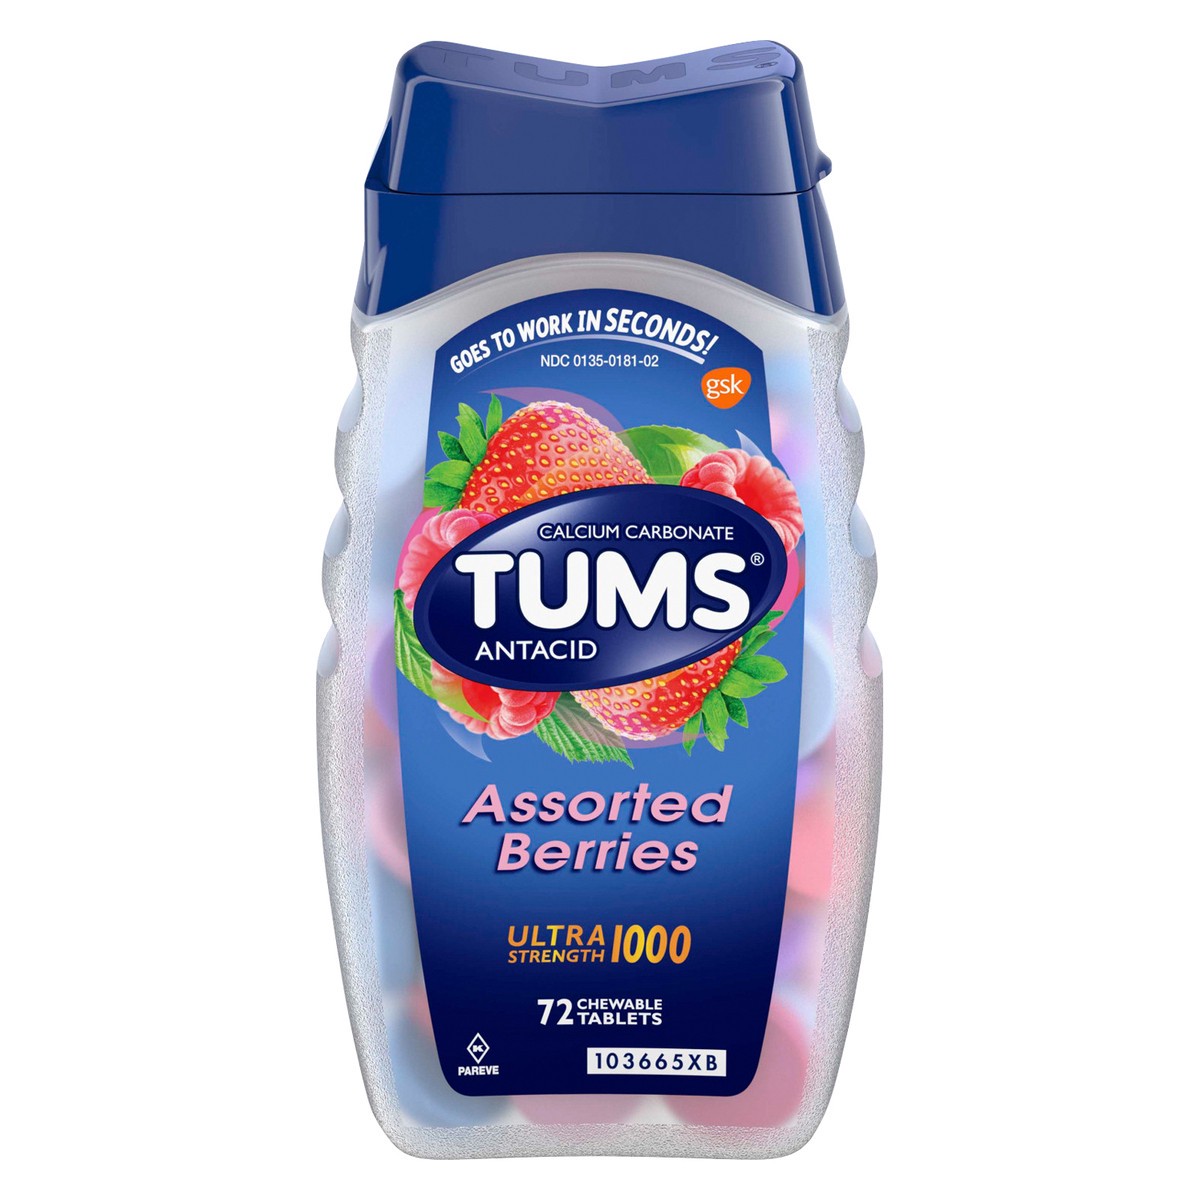 slide 1 of 7, TUMS Ultra Strength Chewable Antacid Tablets for Heartburn Relief, Assorted Berries - 72 Count, 72 ct